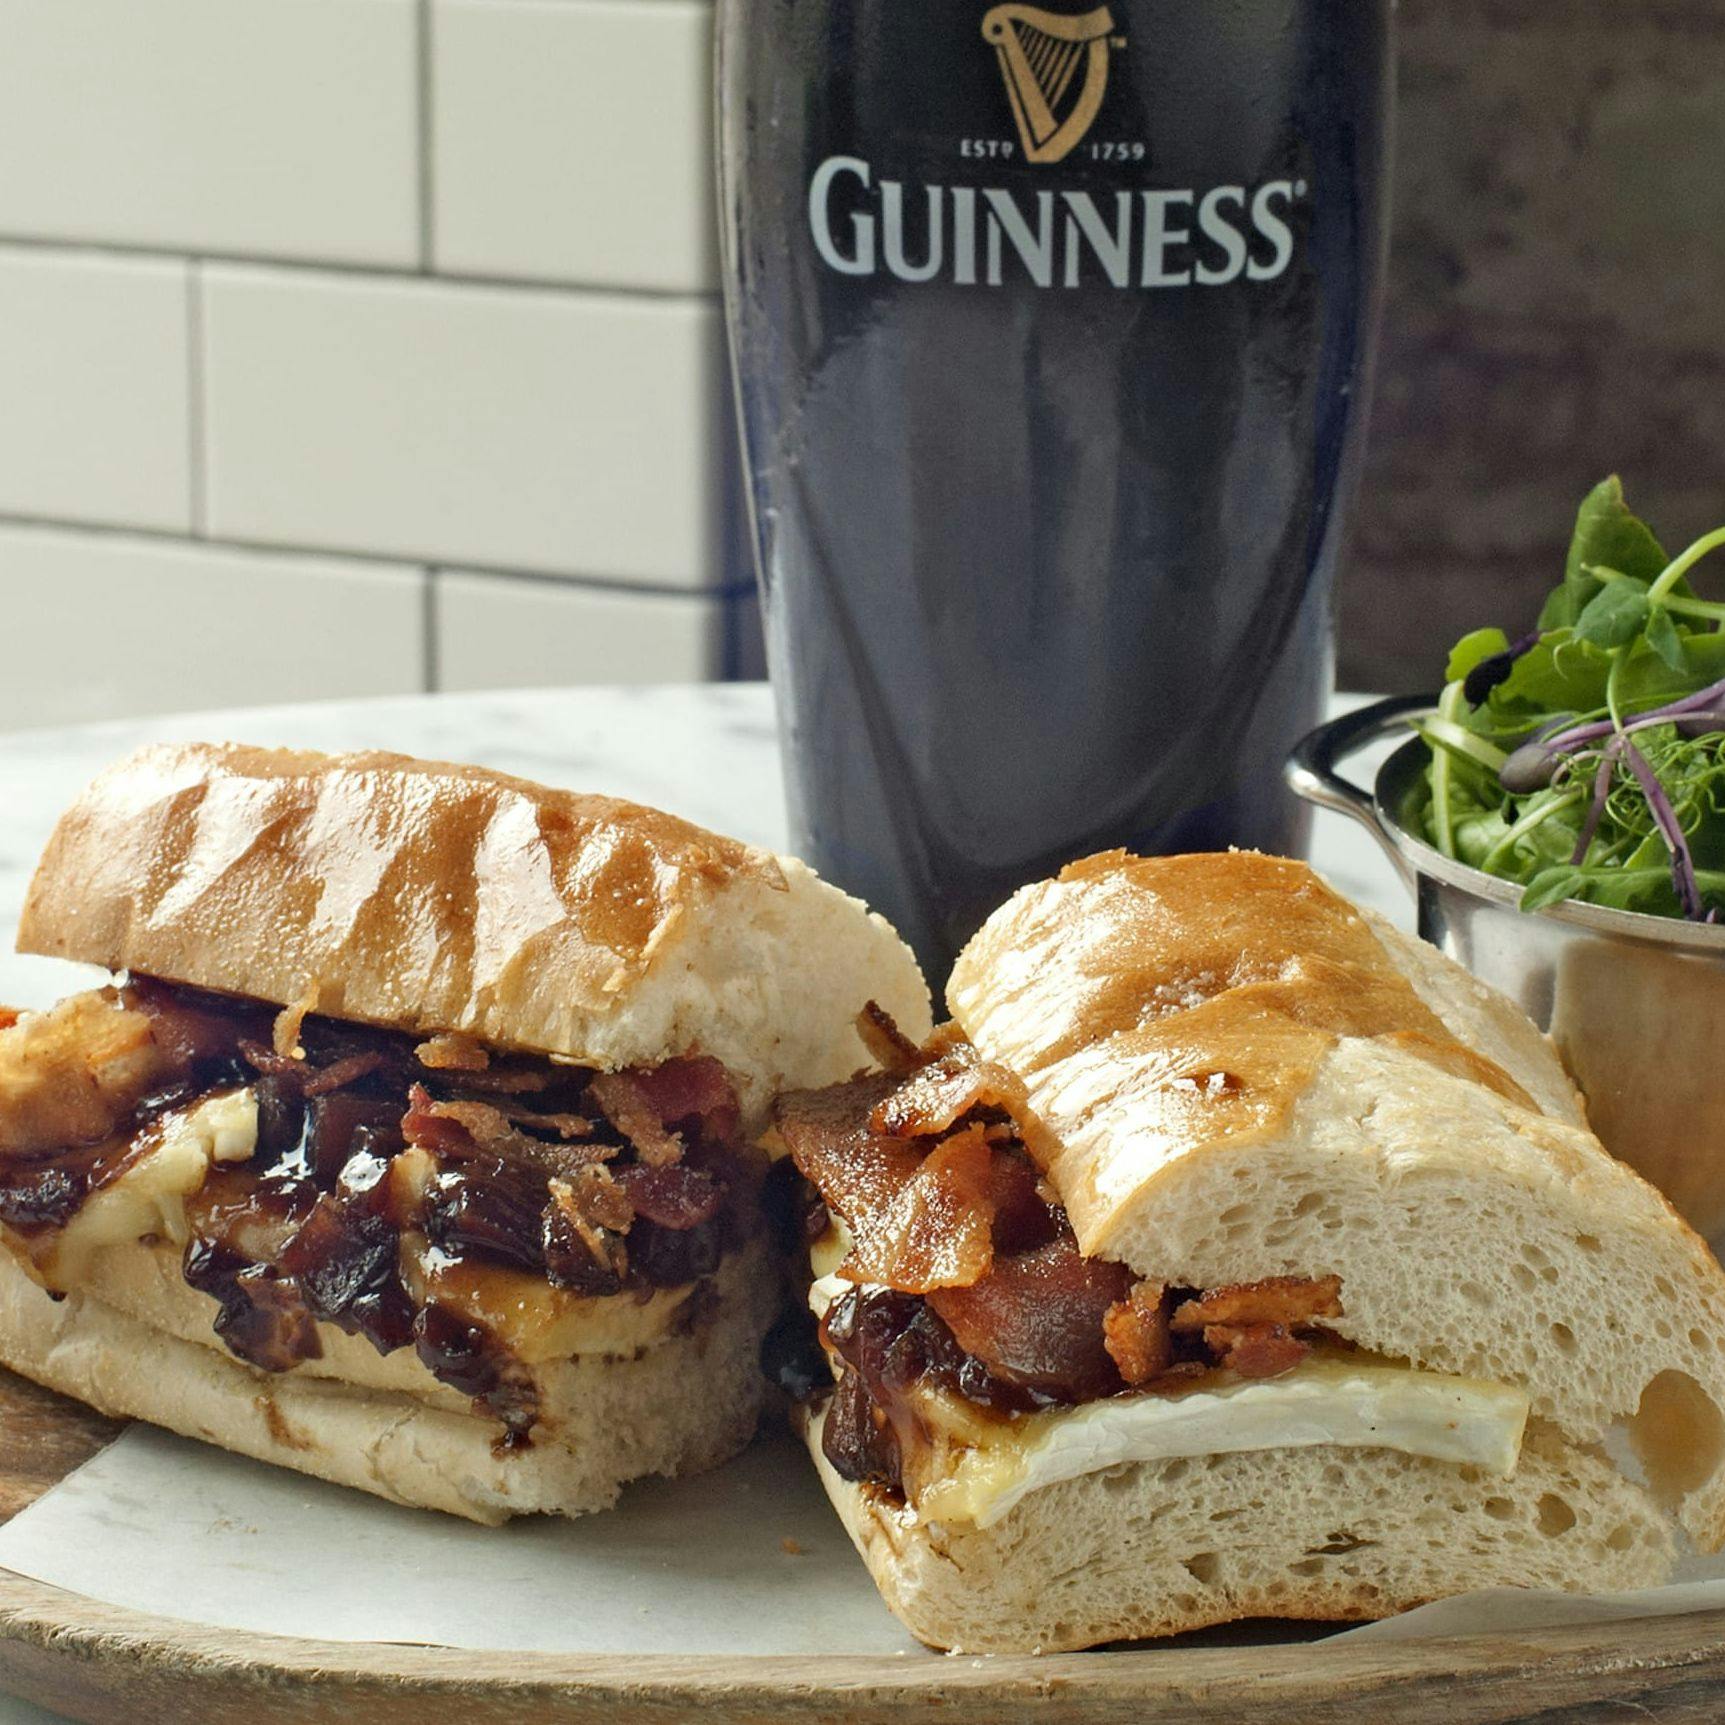 Guinness sandwich with pint of Guinness